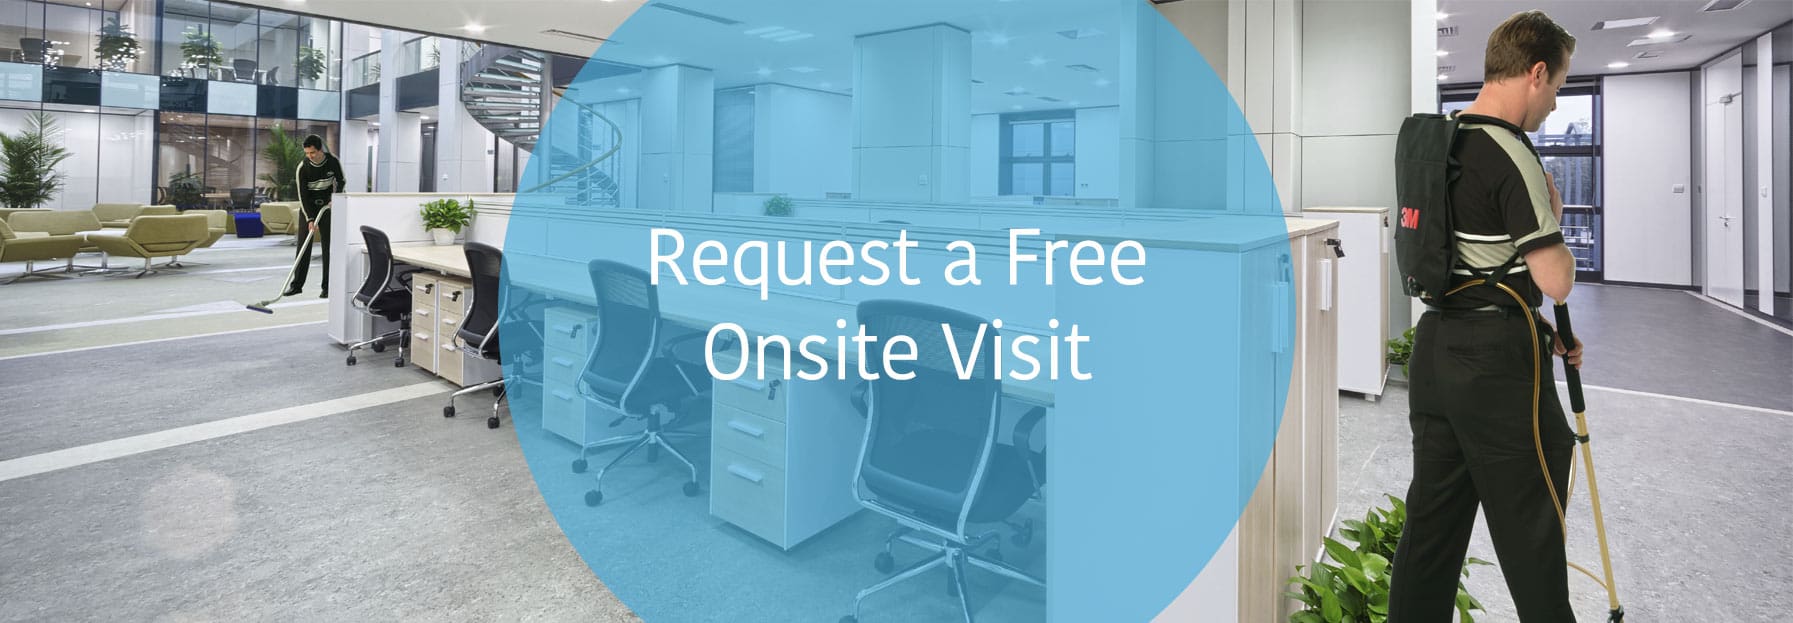 Request a Free Onsite Visit